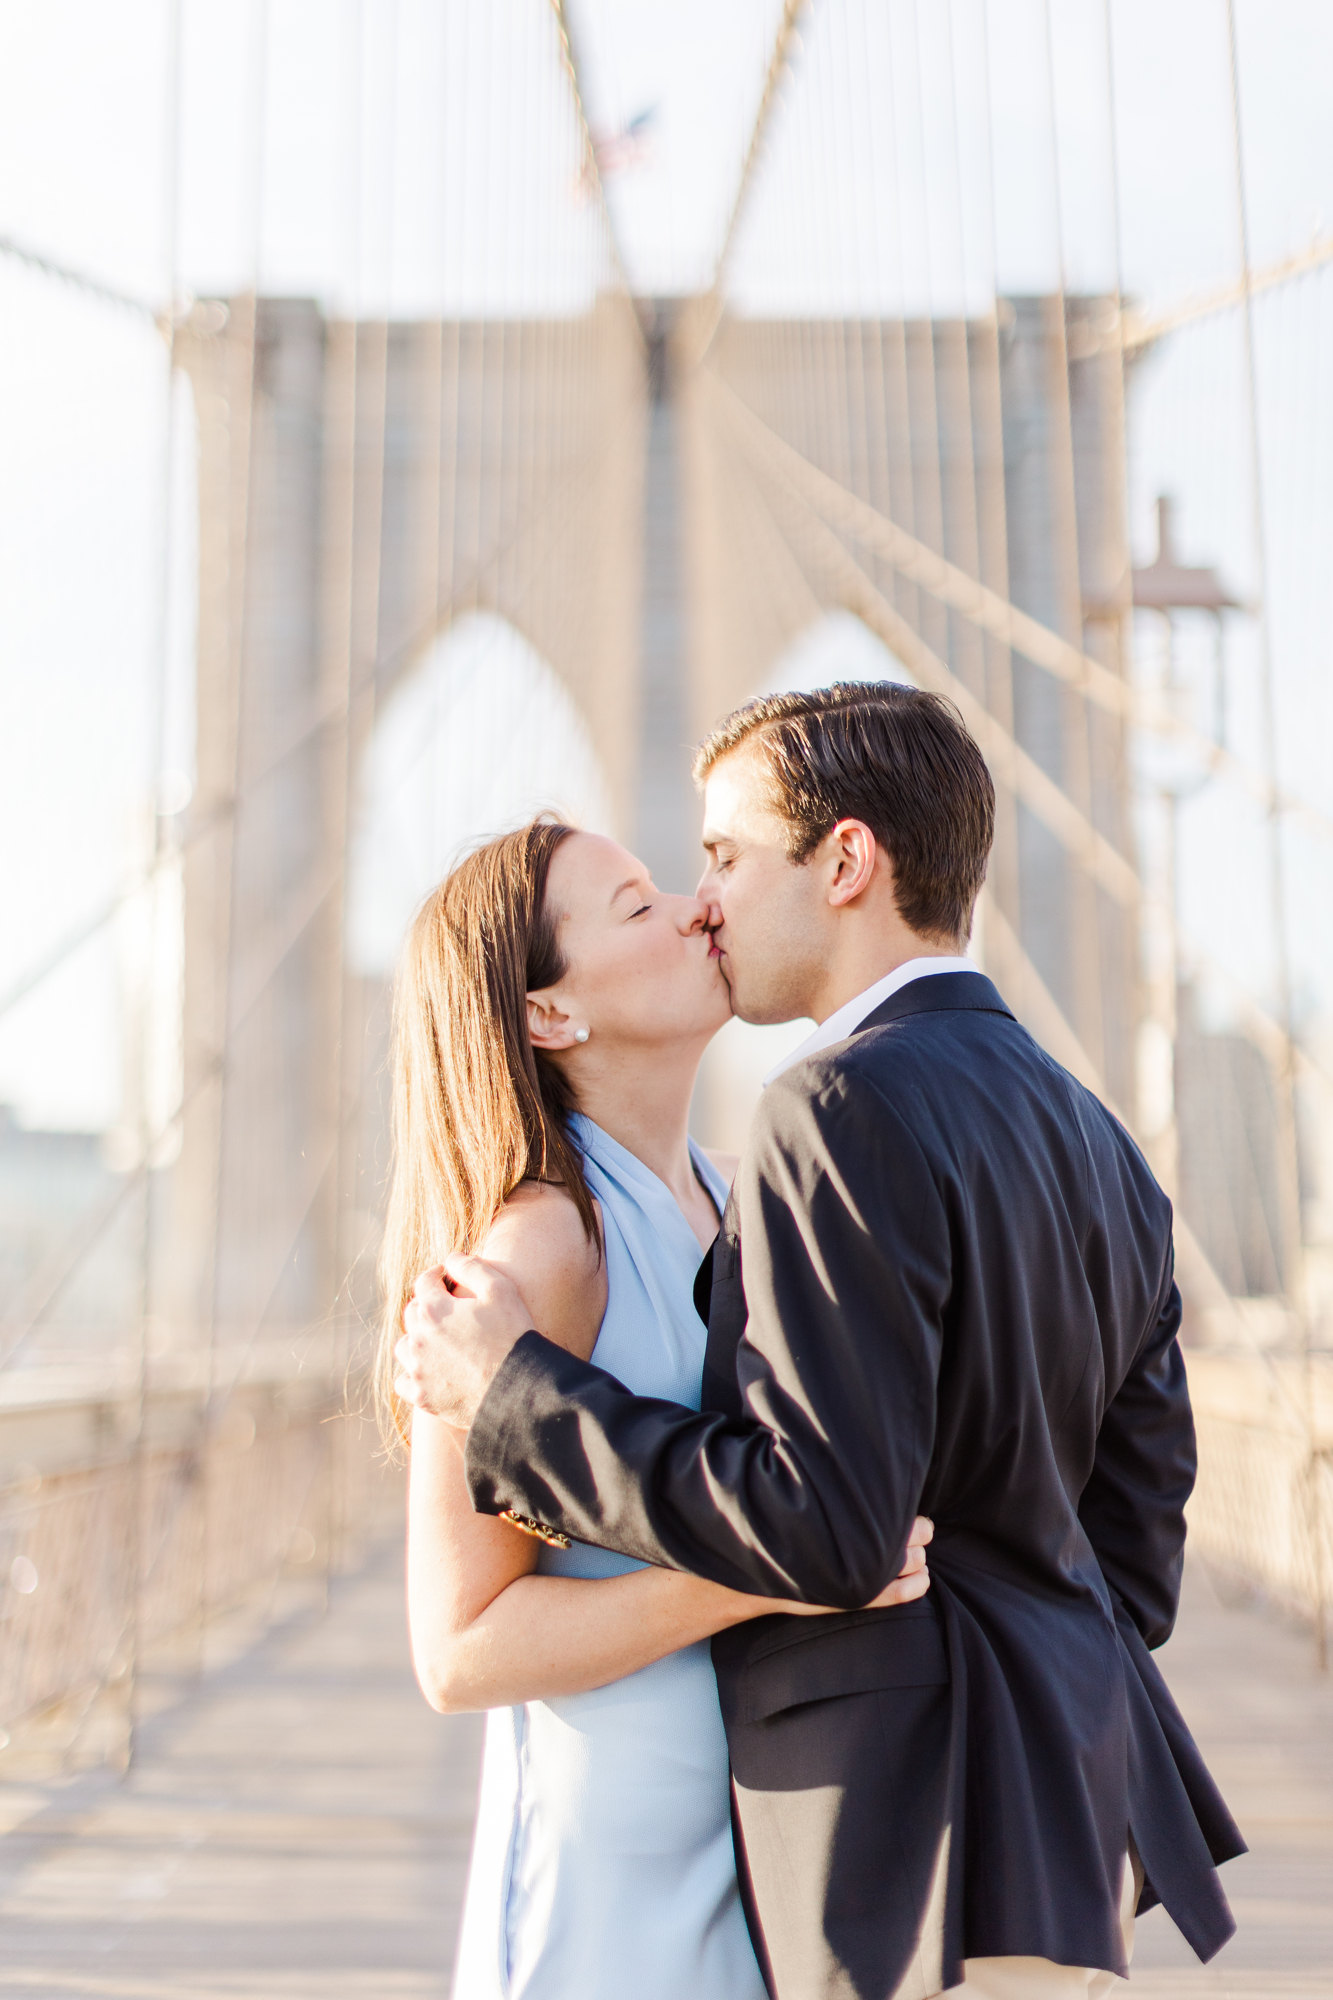 Special Engagement Photos in Brooklyn Heights